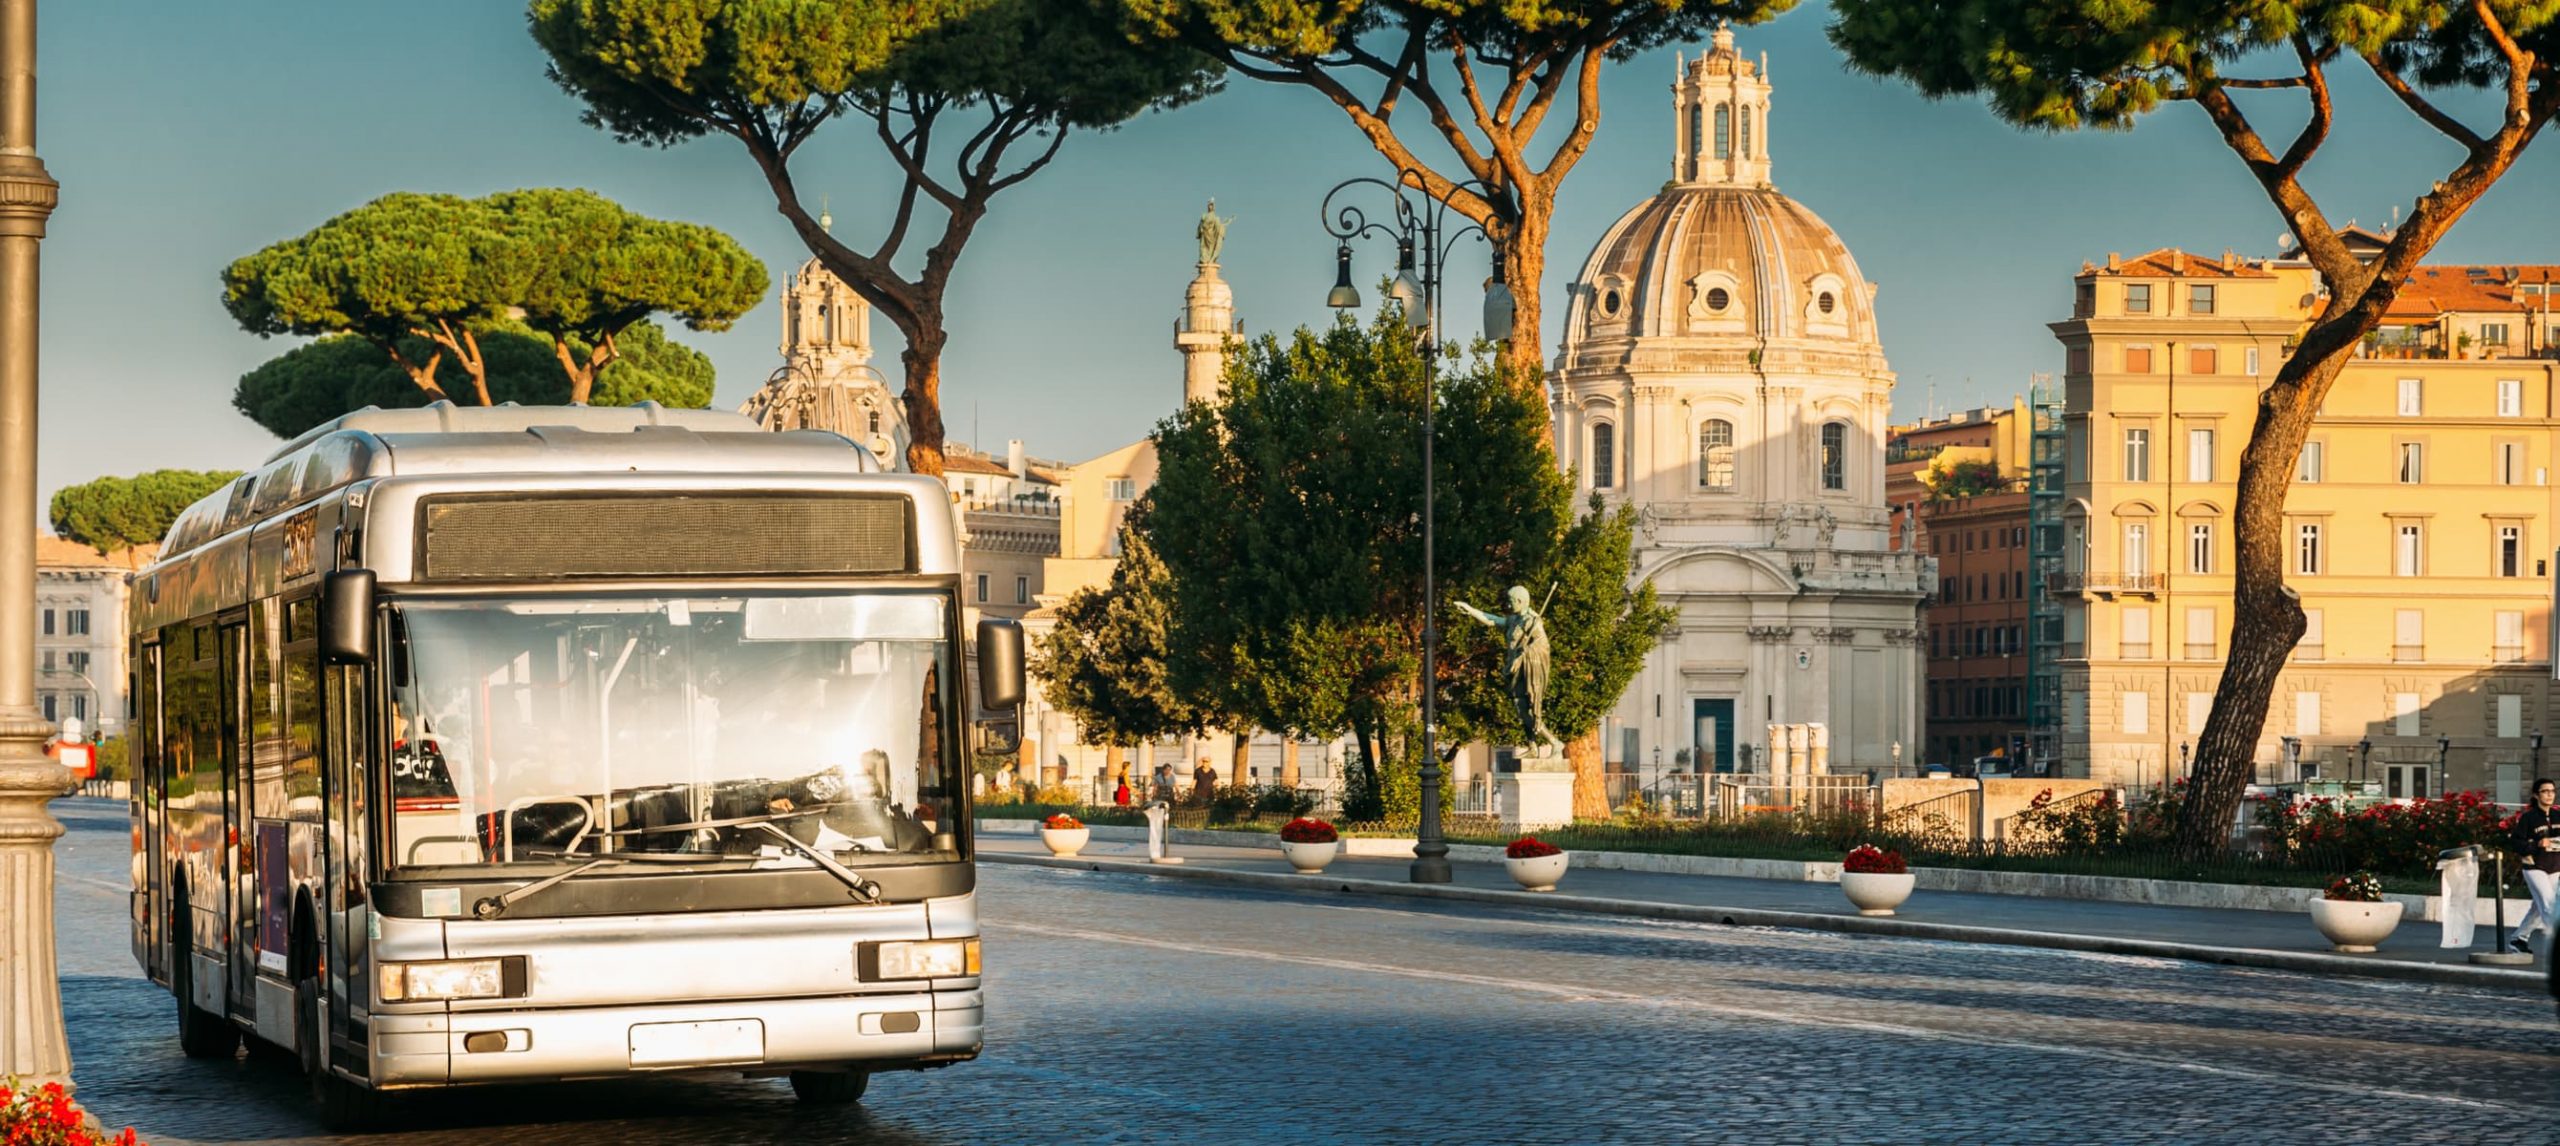 Public City Bus At Bus Stop In Via Dei Fori Imperiali Street In Sunny Summer Morning. View On Church Of Most Holy Name Of Mary.